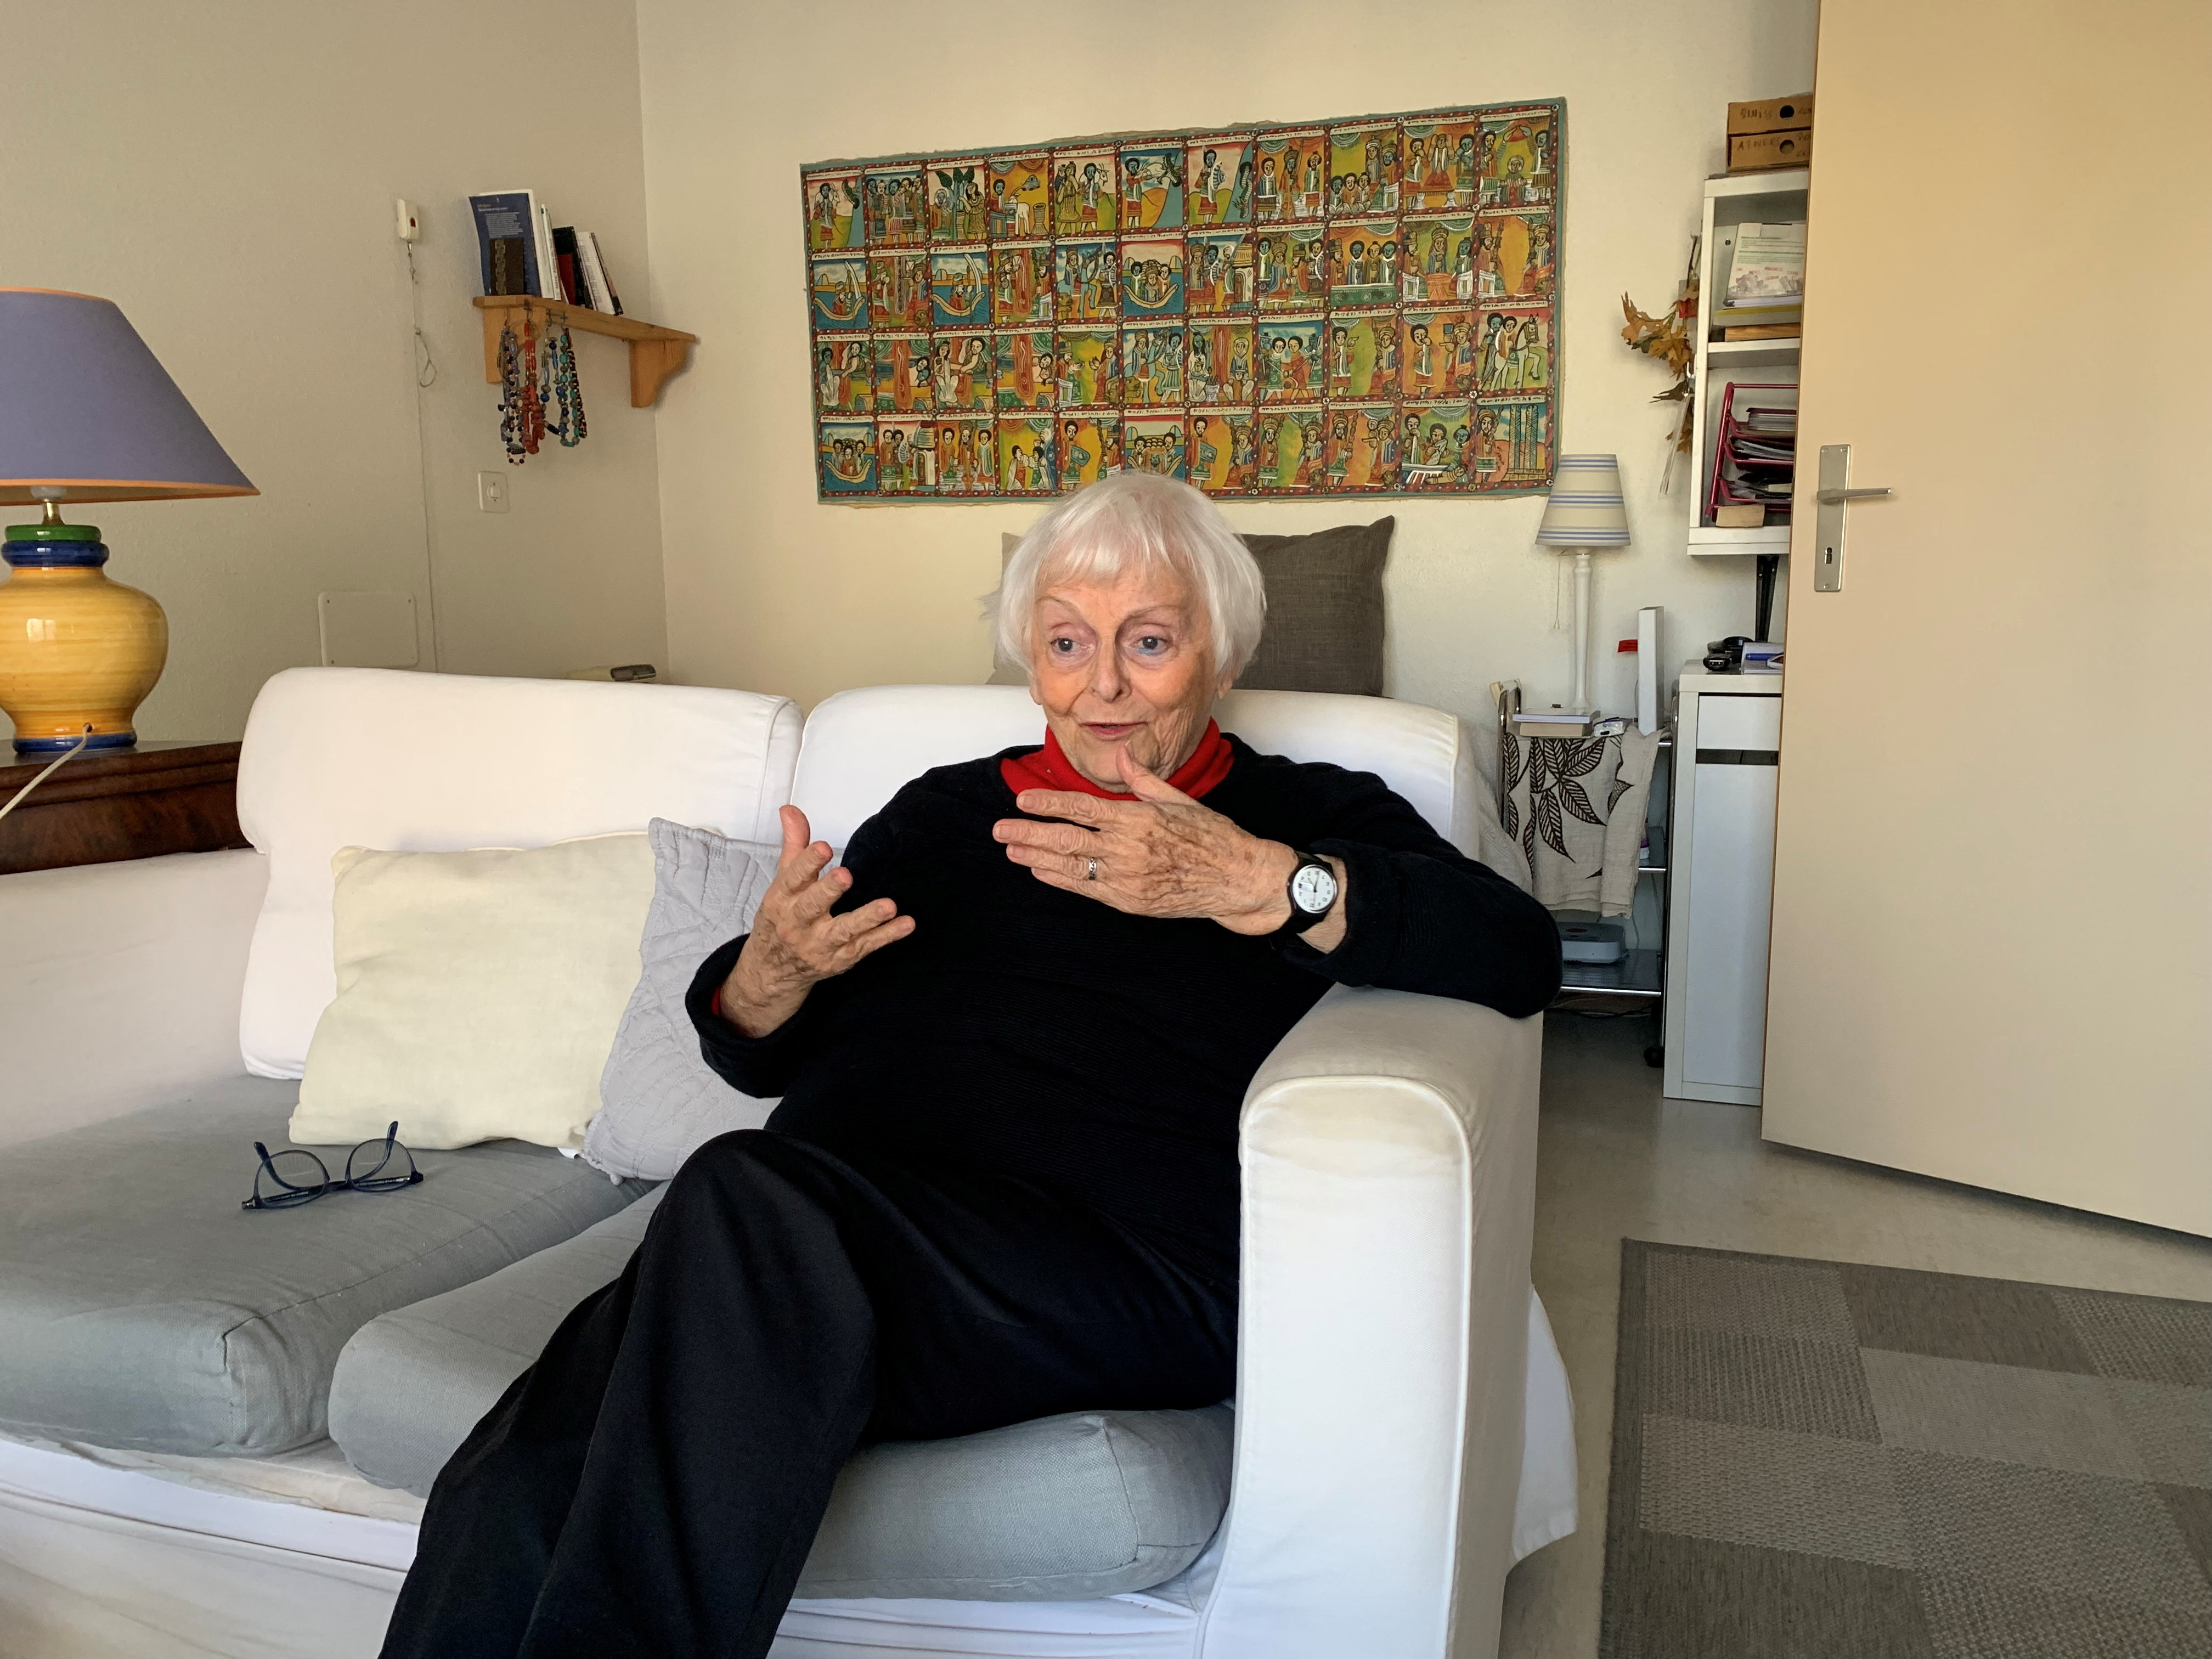 Marie-Eve Volkoff, 85, gestures during an interview in her apartment in Geneva